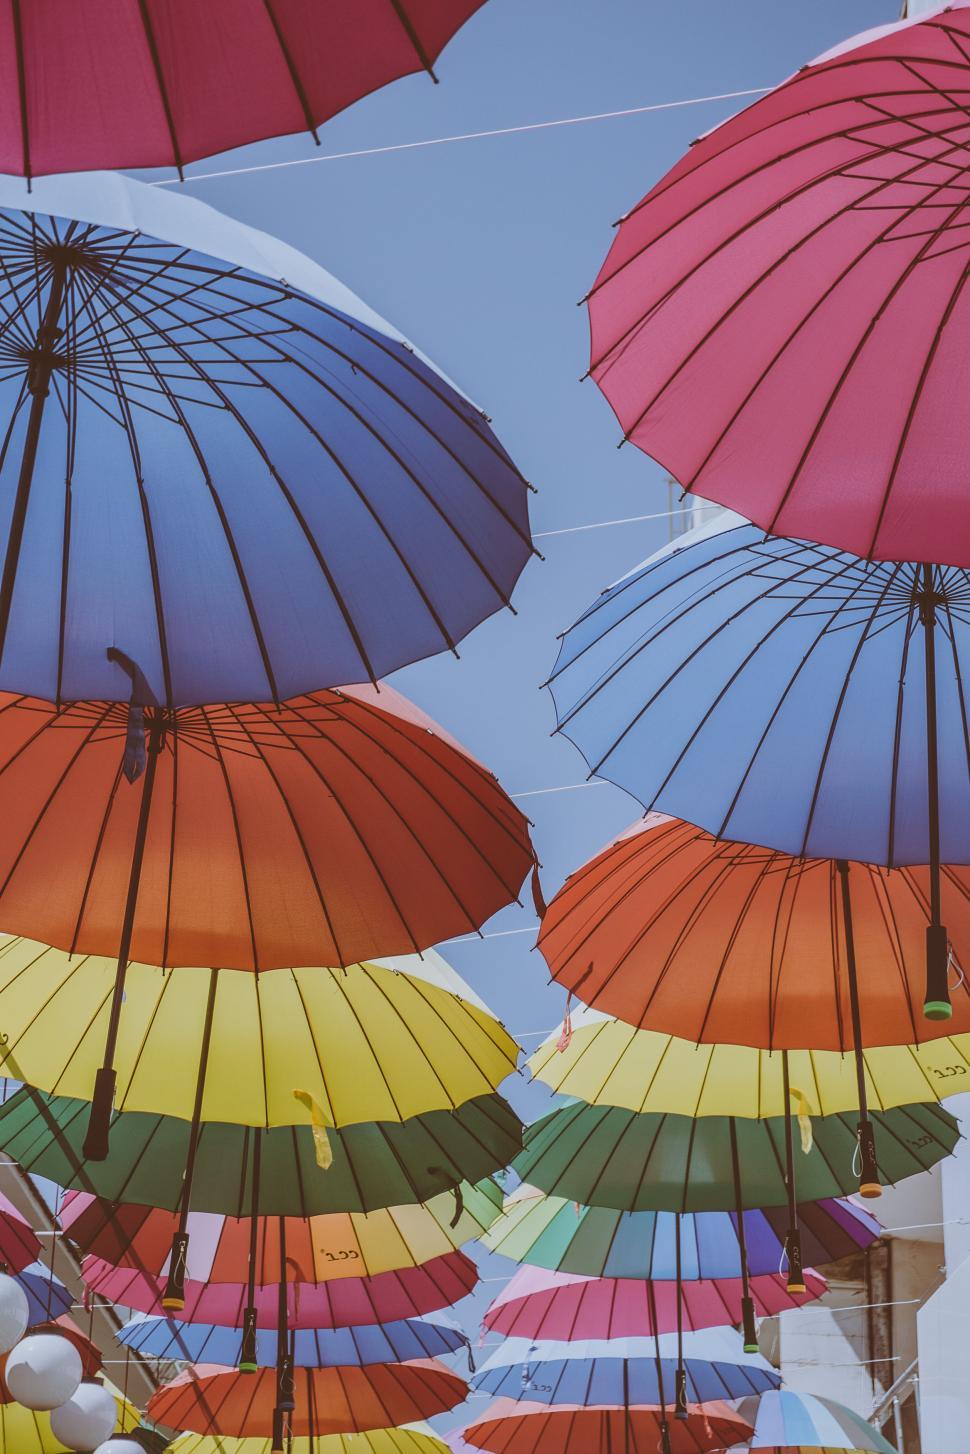 Free Image of Umbrellas Hanging in the Air 